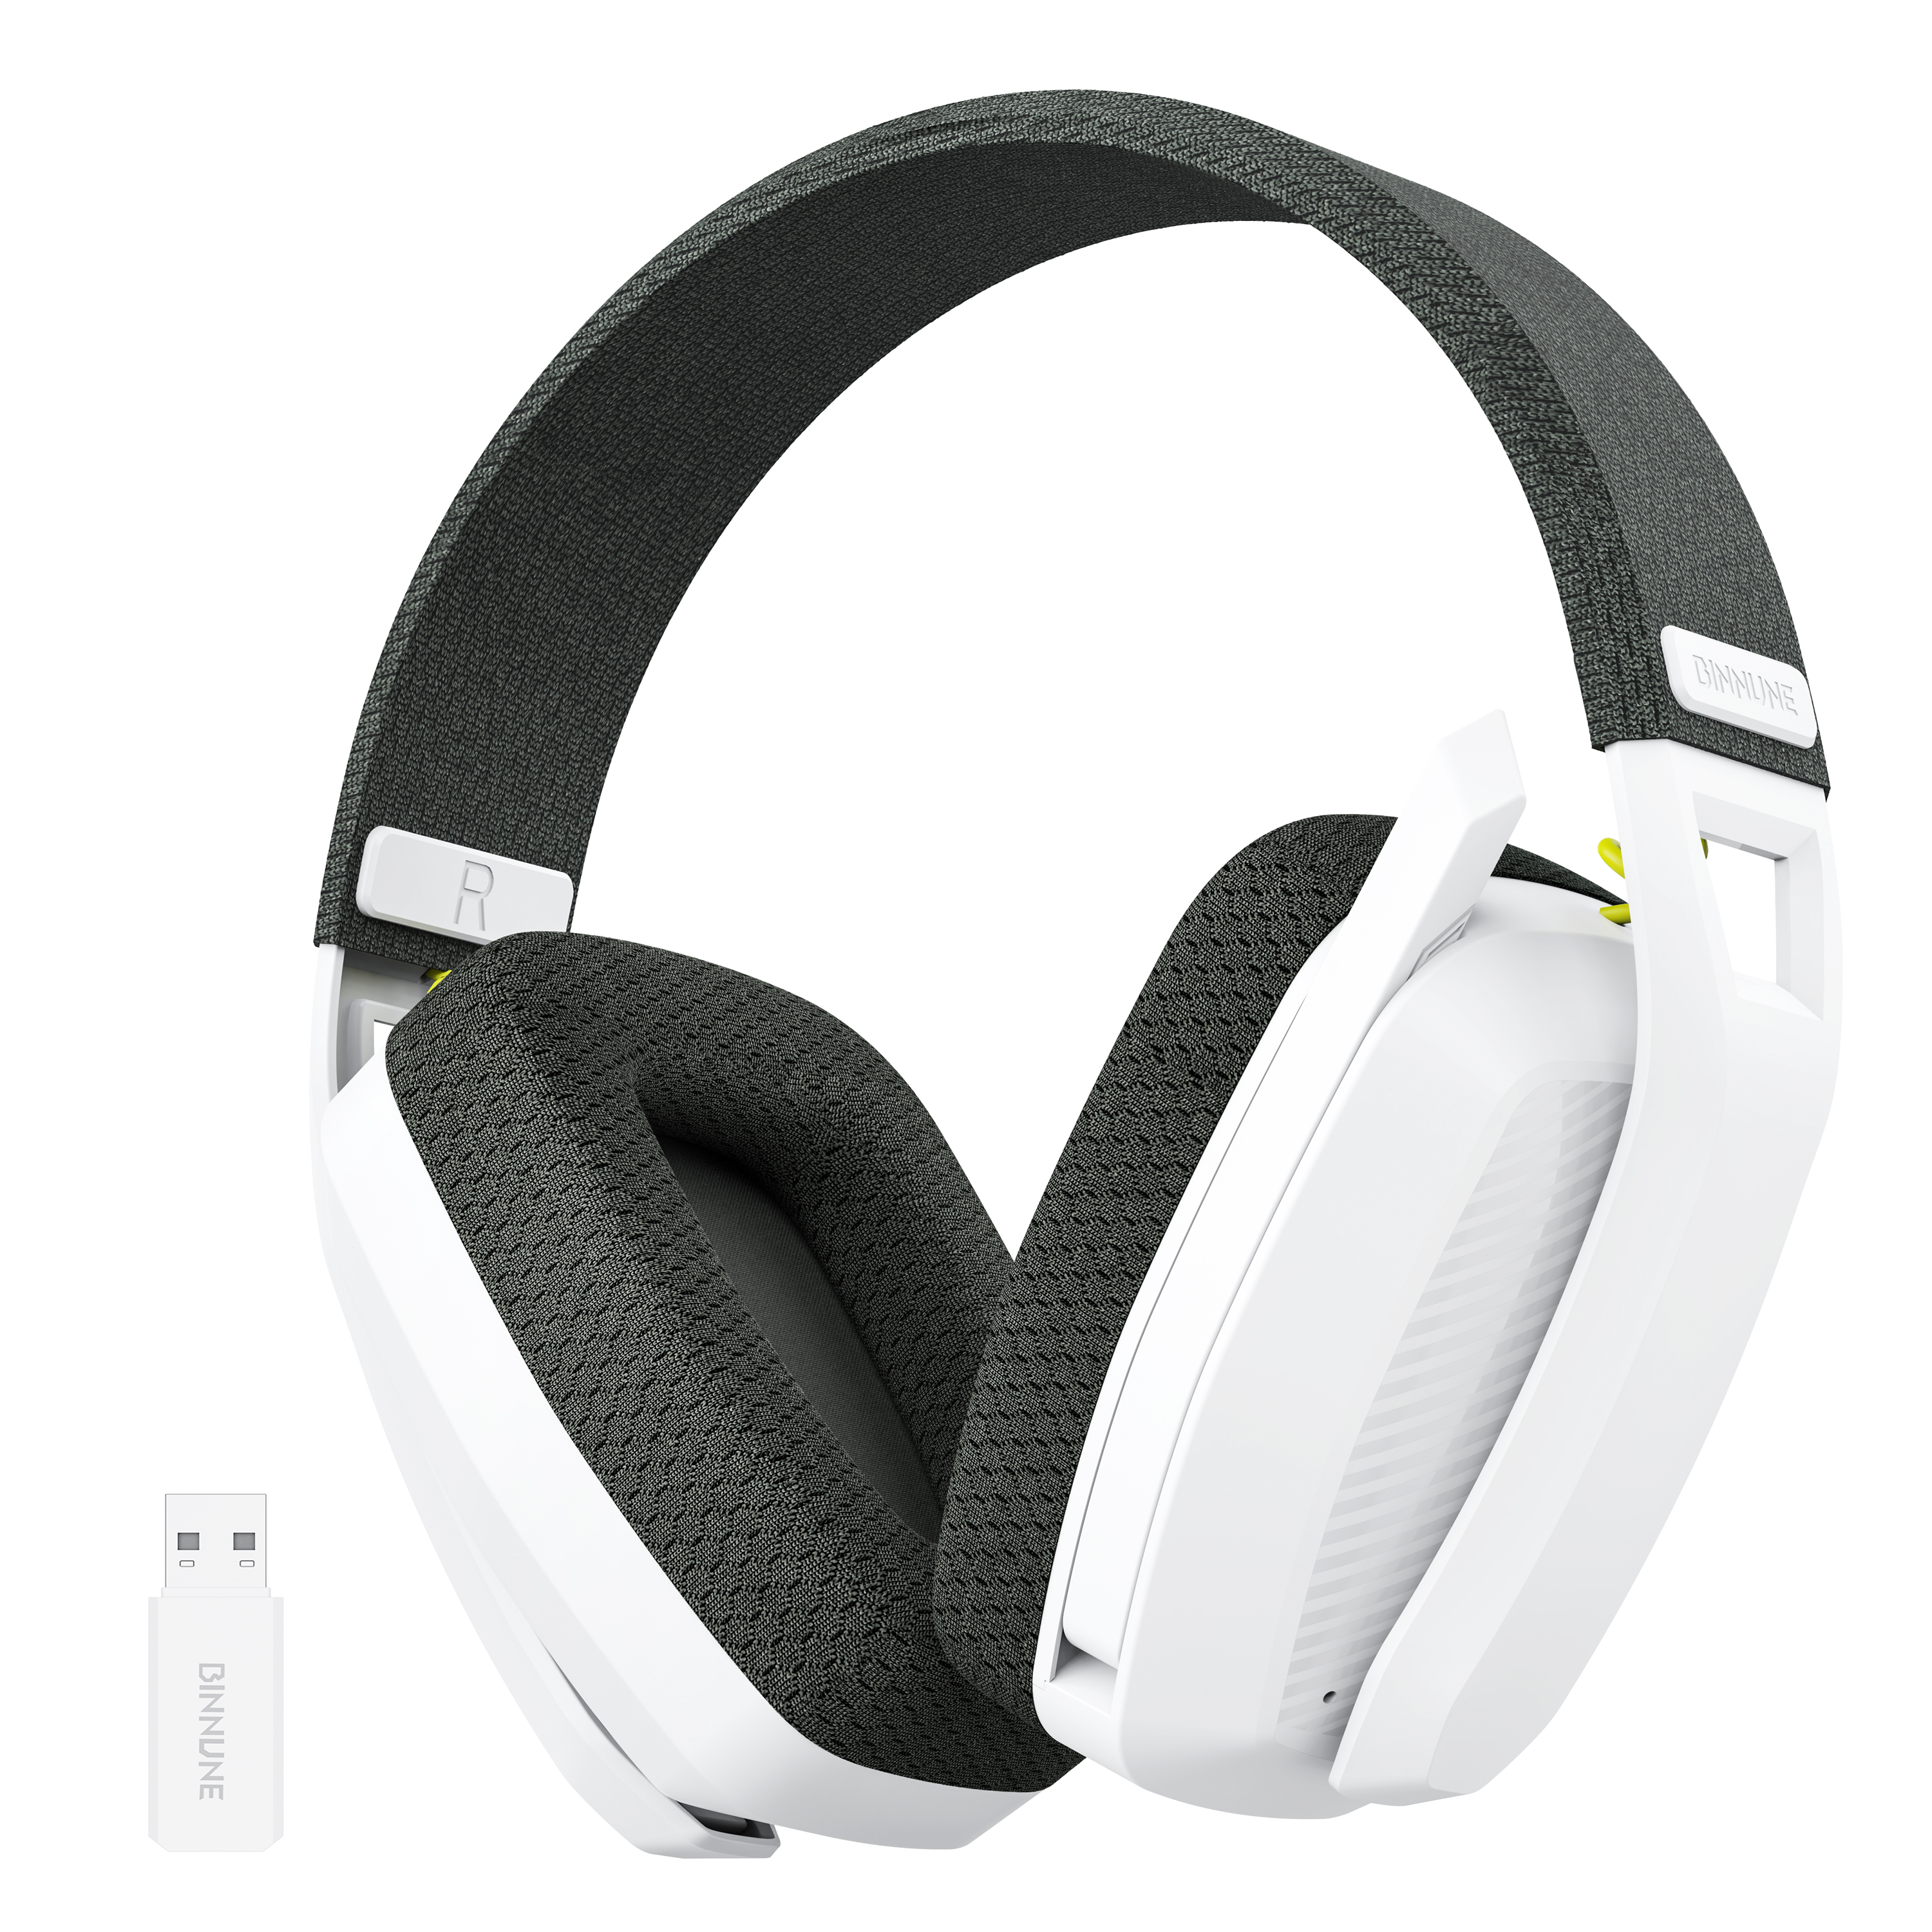 BINNUNE Headphone for PS5 Wireless Gaming Headset with Mic Compatible with PC, PS4, Nintendo Switch - Bluetooth 5.3, 48 Hr Playtime, Over-Ear, Noise Isolation Earcups, Low Latency - White - image 1 of 7